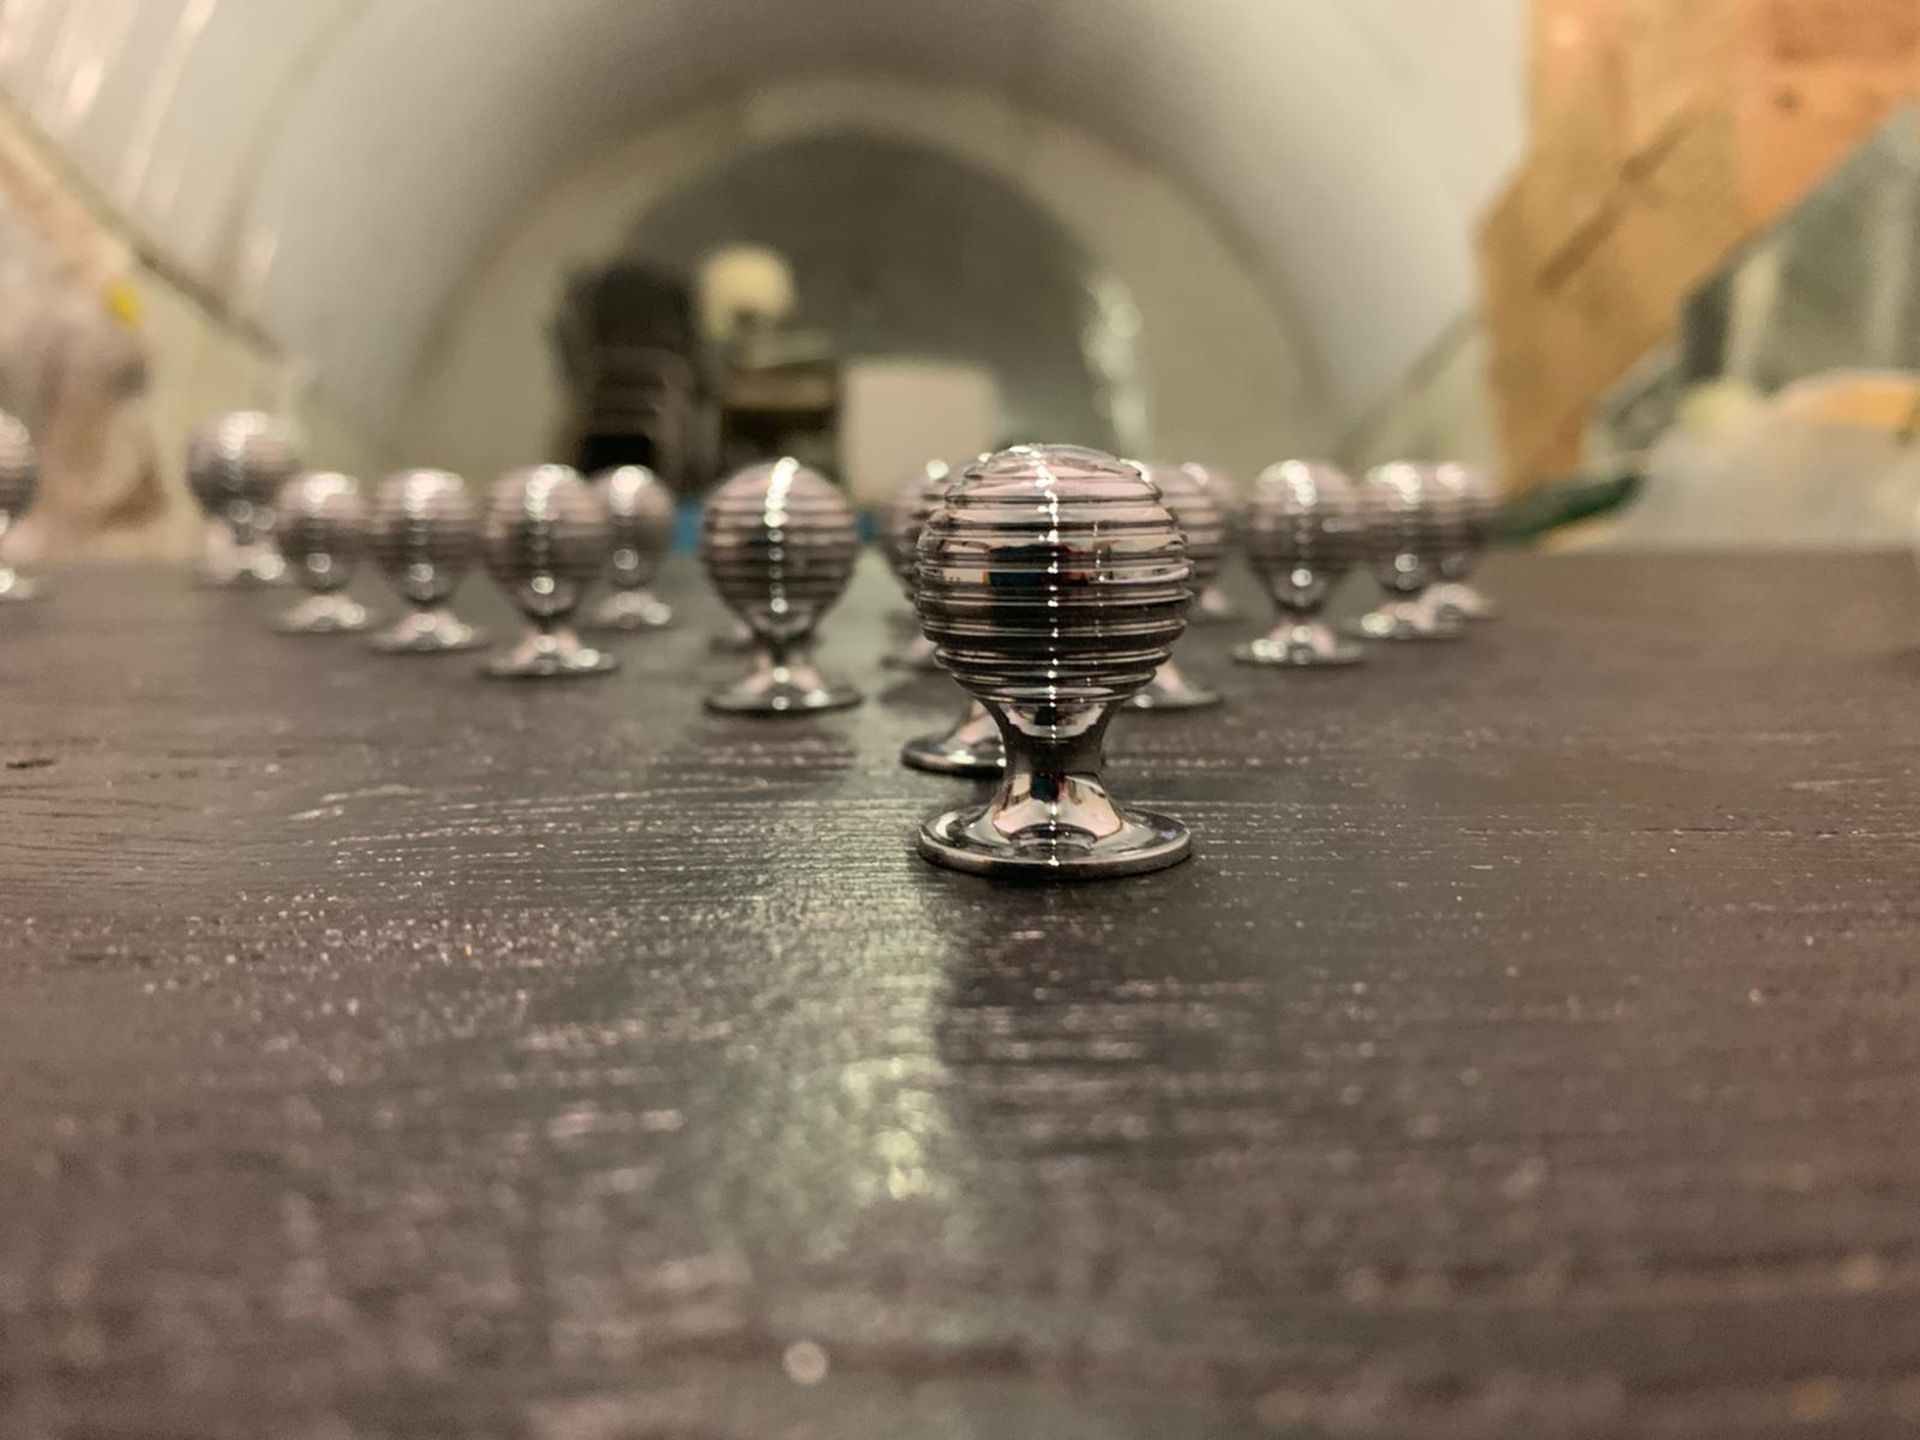 Set Of 16 Chrome Knobs 3cm Consigned From A Luxury Mayfair Residence From A Recently Bespoke - Image 2 of 3